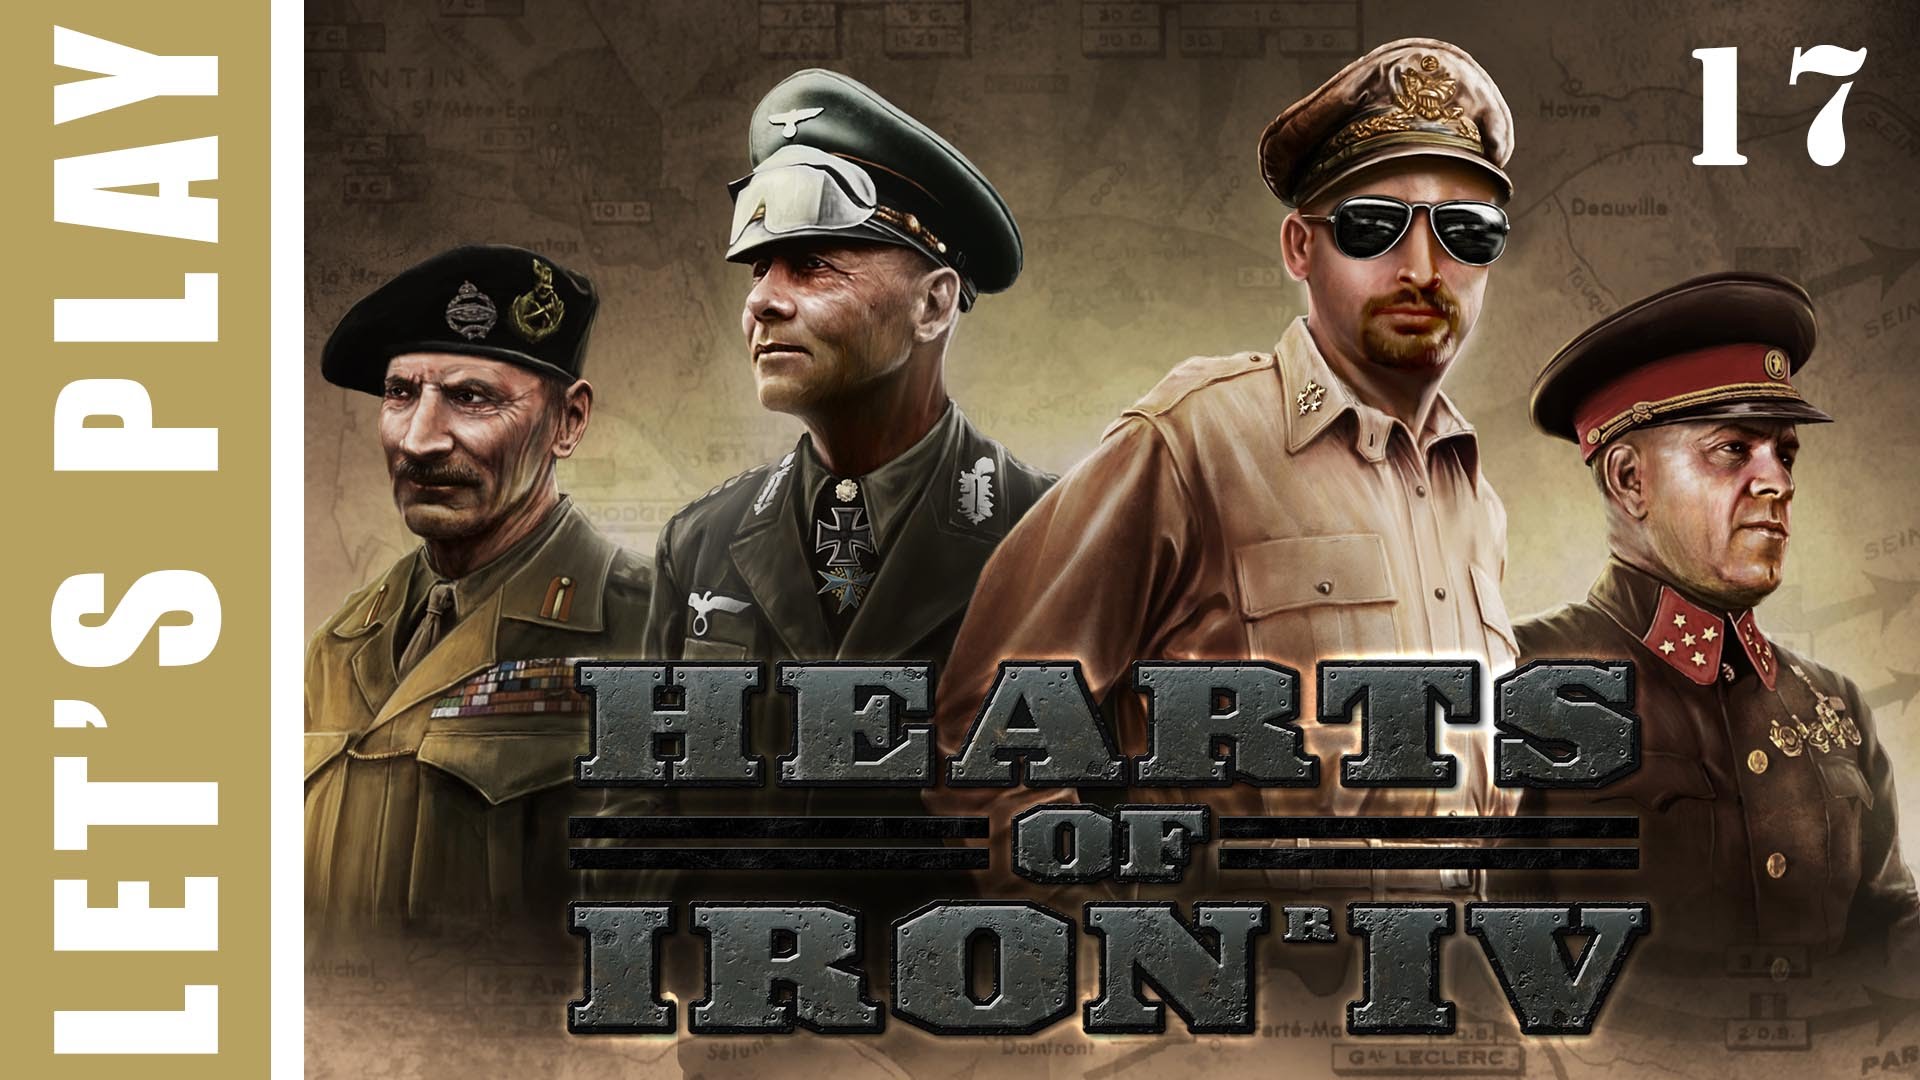 Hearts of Iron IV Germany Wins World War 2 Let’s Play 17